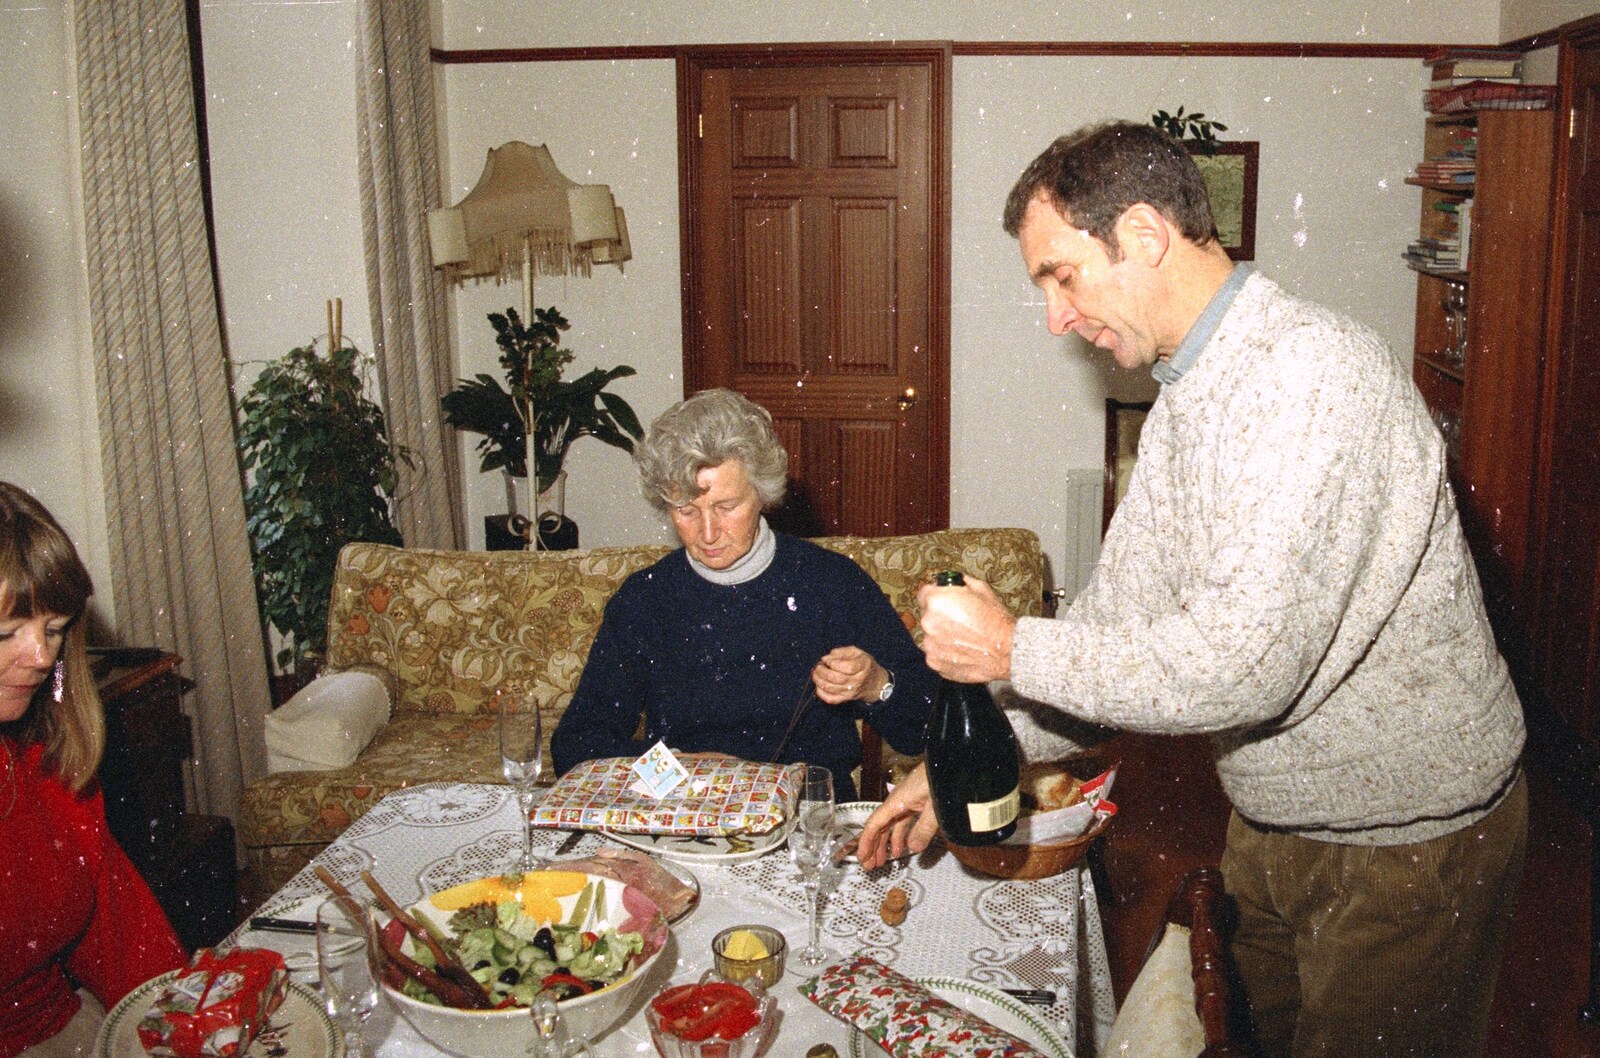 Mike roams around with a bottle from Christmas in Devon and Stuston - 25th December 1991